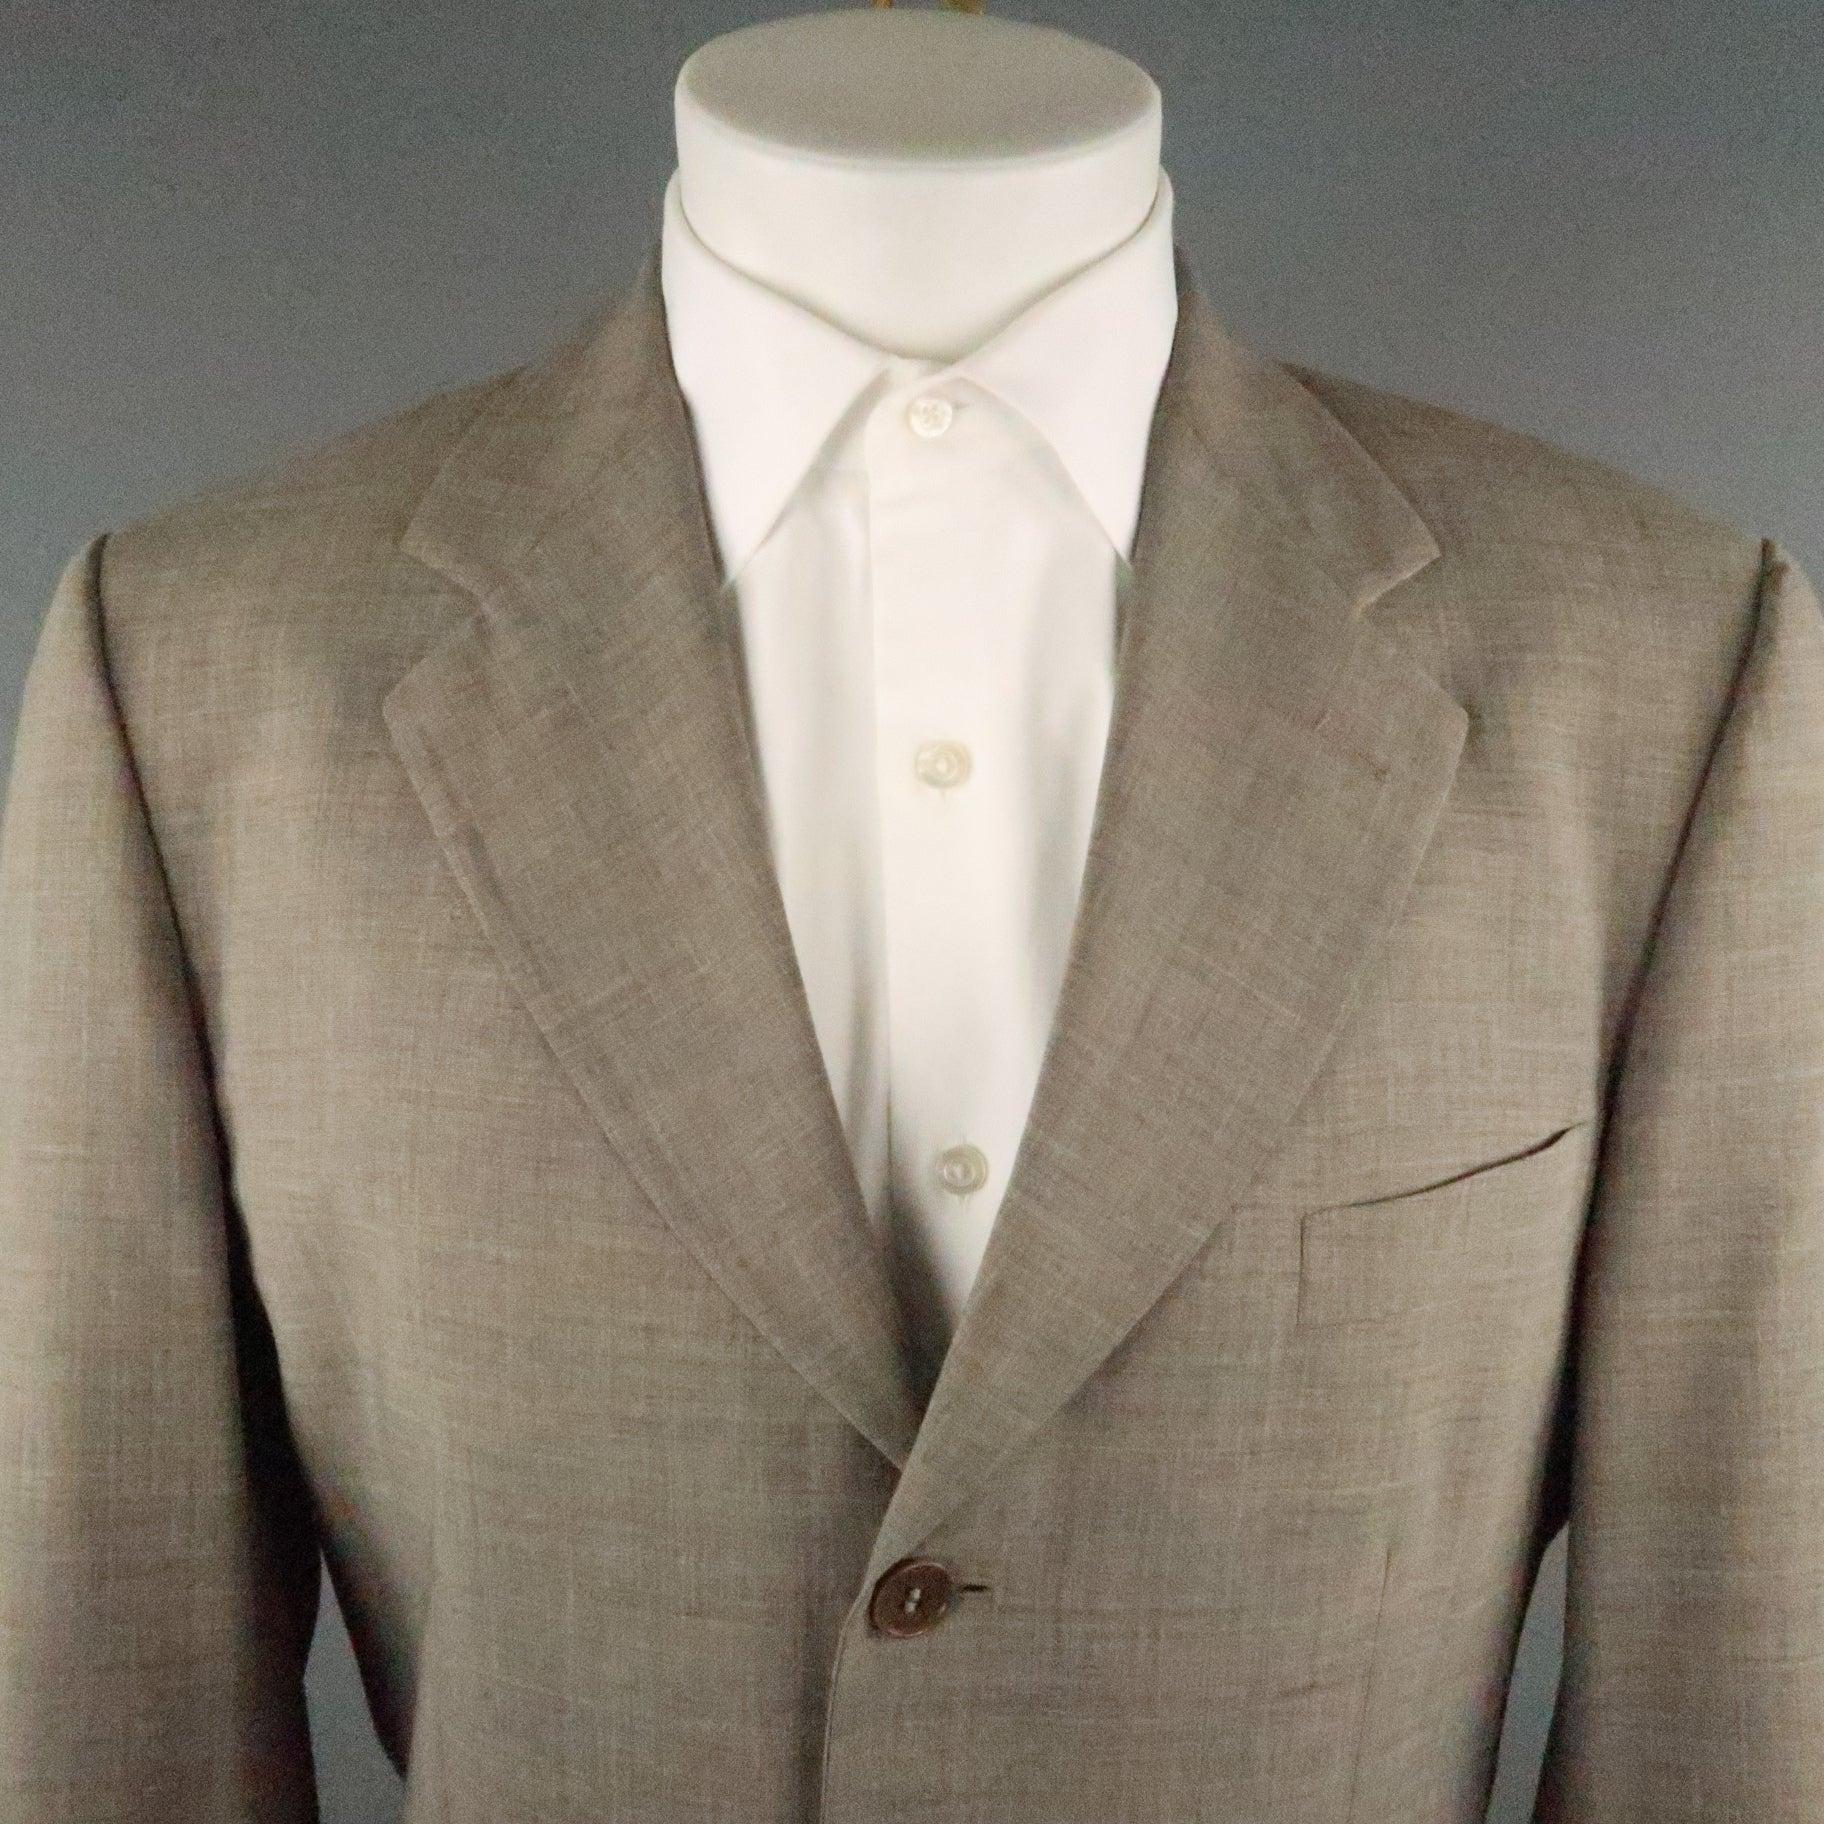 PAUL SMITH suit comes in a brown rayon featuring a notch lapel, single breasted, flap pockets, and a matching flat front style pant. Made in Italy.
Very Good Pre-Owned Condition.
 

Marked:   40
 

Measurements: 
  
-Jacket
l	Shoulder: 19.5 inches